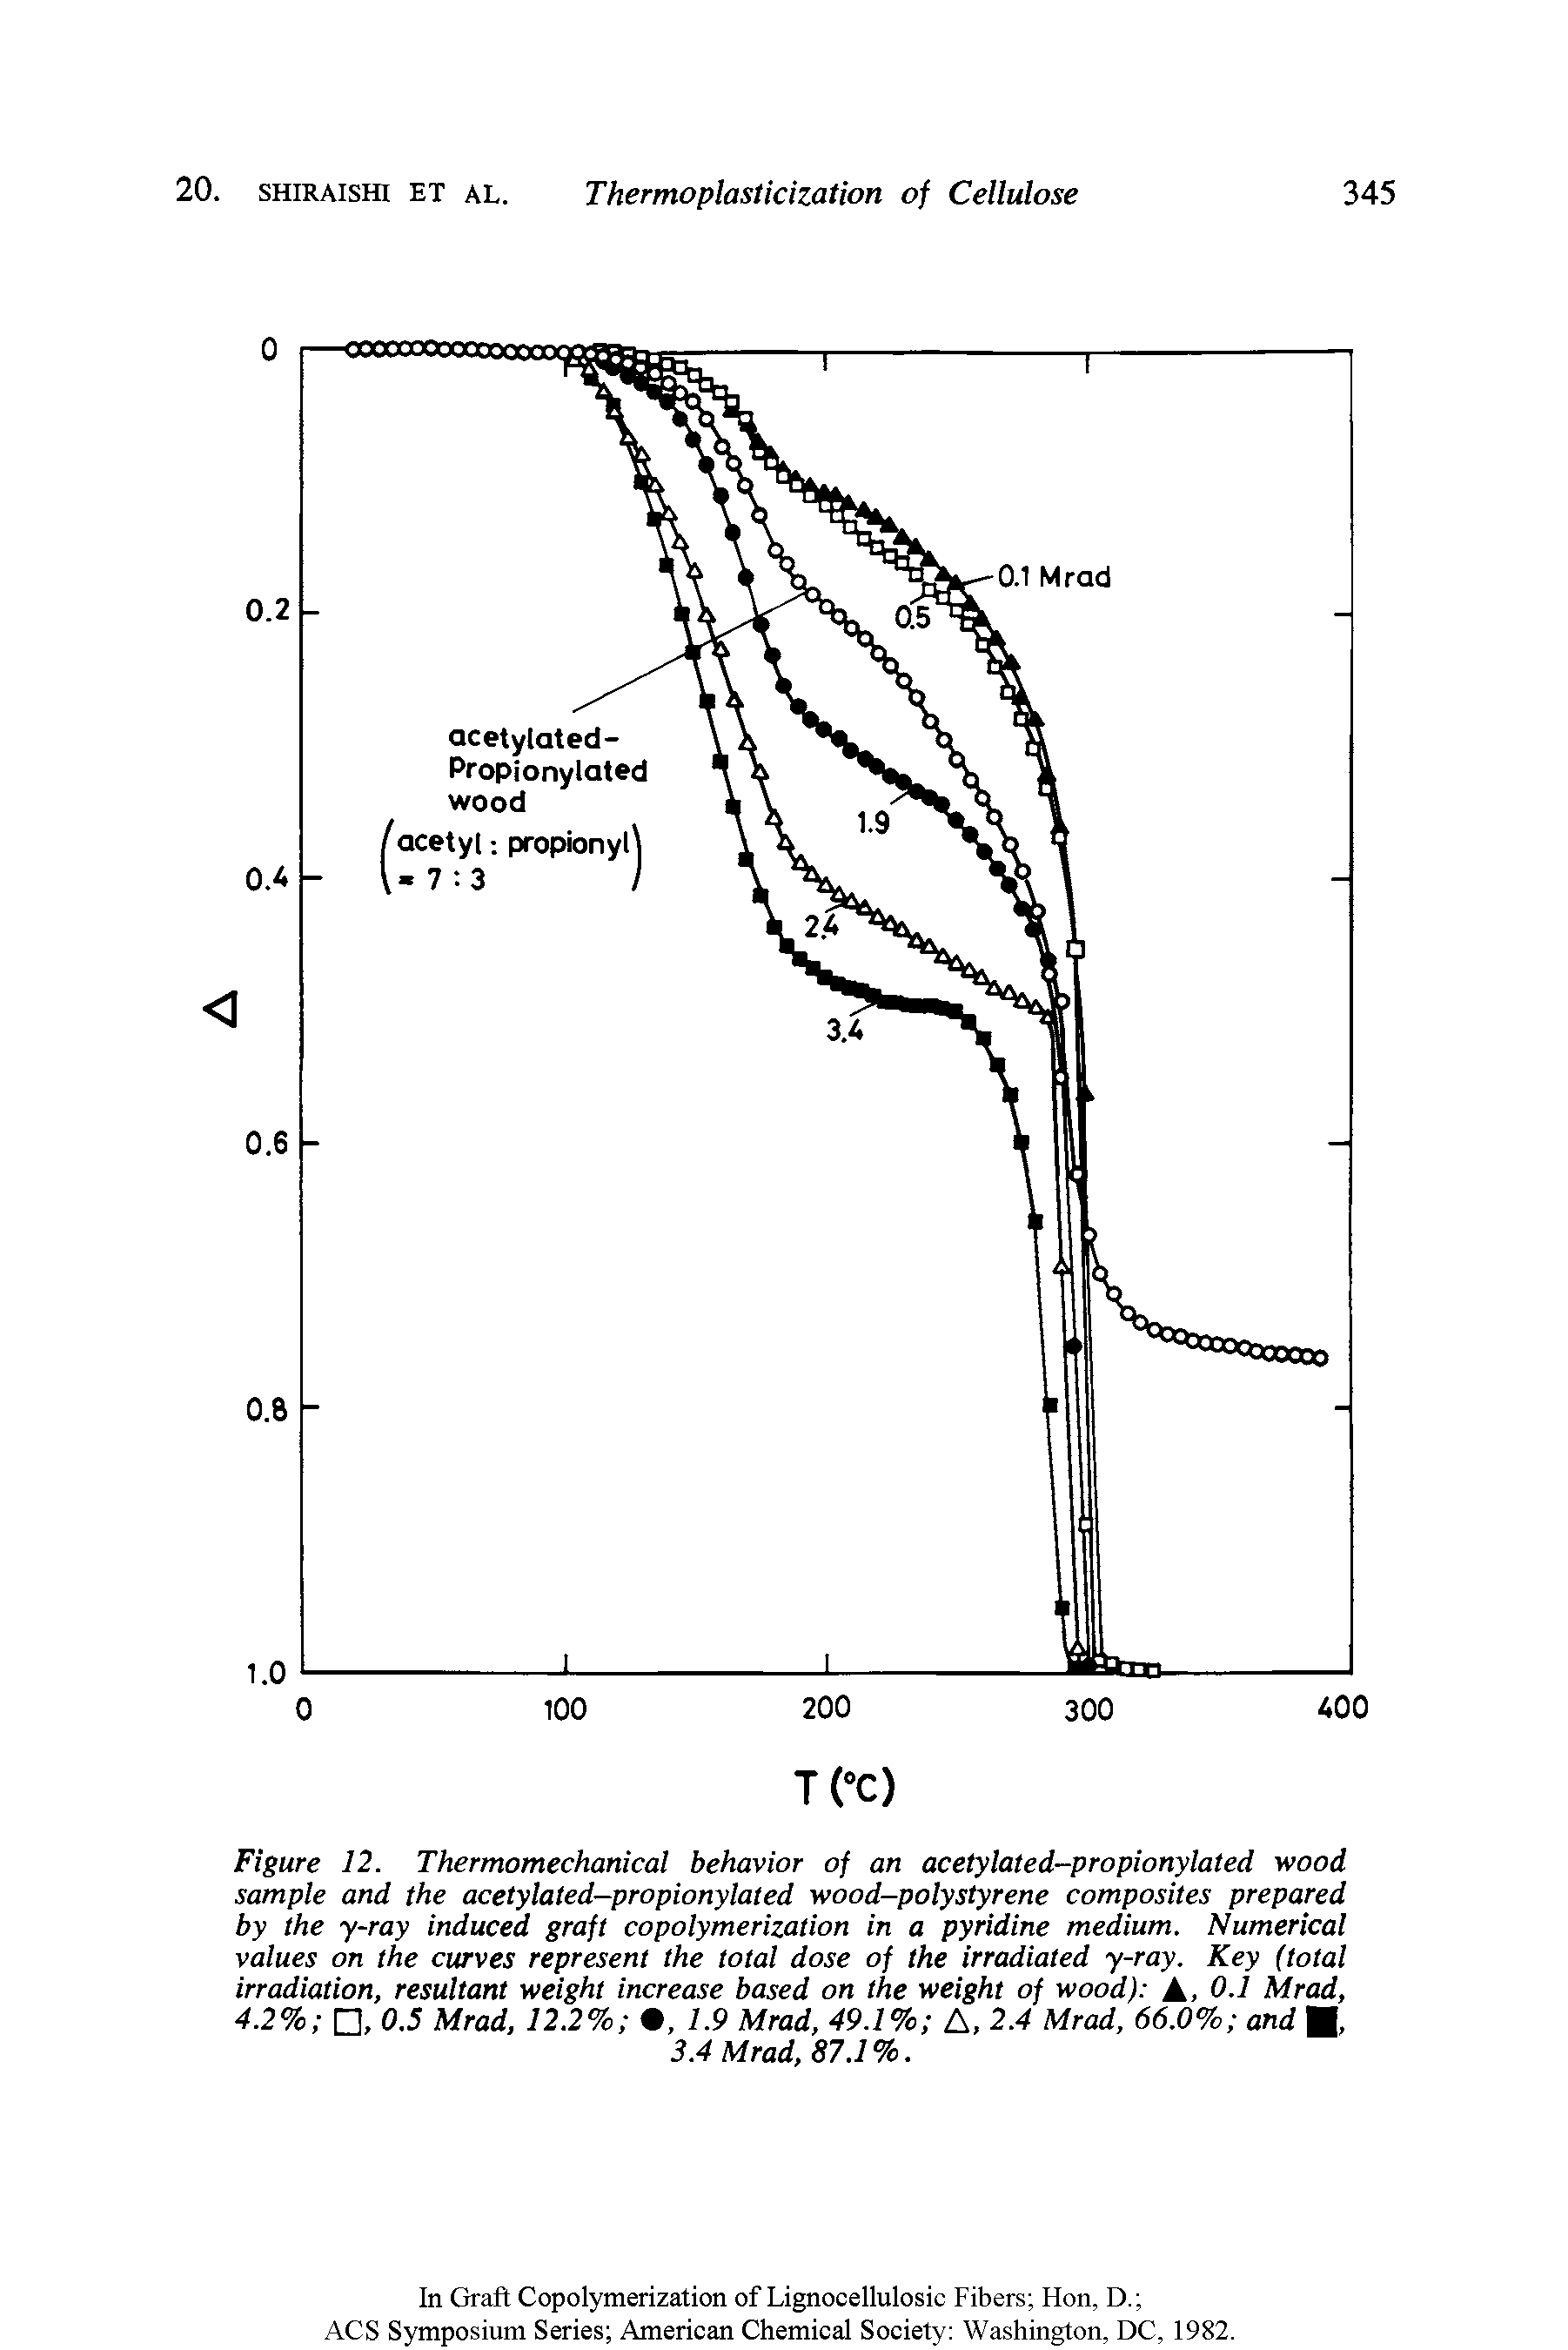 Figure 12. Thermomechanical behavior of an acetylated-propionylated wood sample and the acetylated-propionylated wood-polystyrene composites prepared by the y-ray induced graft copolymerization in a pyridine medium. Numerical values on the curves represent the total dose of the irradiated y-ray. Key (total irradiation, resultant weight increase based on the weight of wood) A, 0.1 Mrad, 4.2% , 0.5 Mrad, 12.2% , 1.9 Mrad, 49.1% A, 2.4 Mrad, 66.0% and ,...